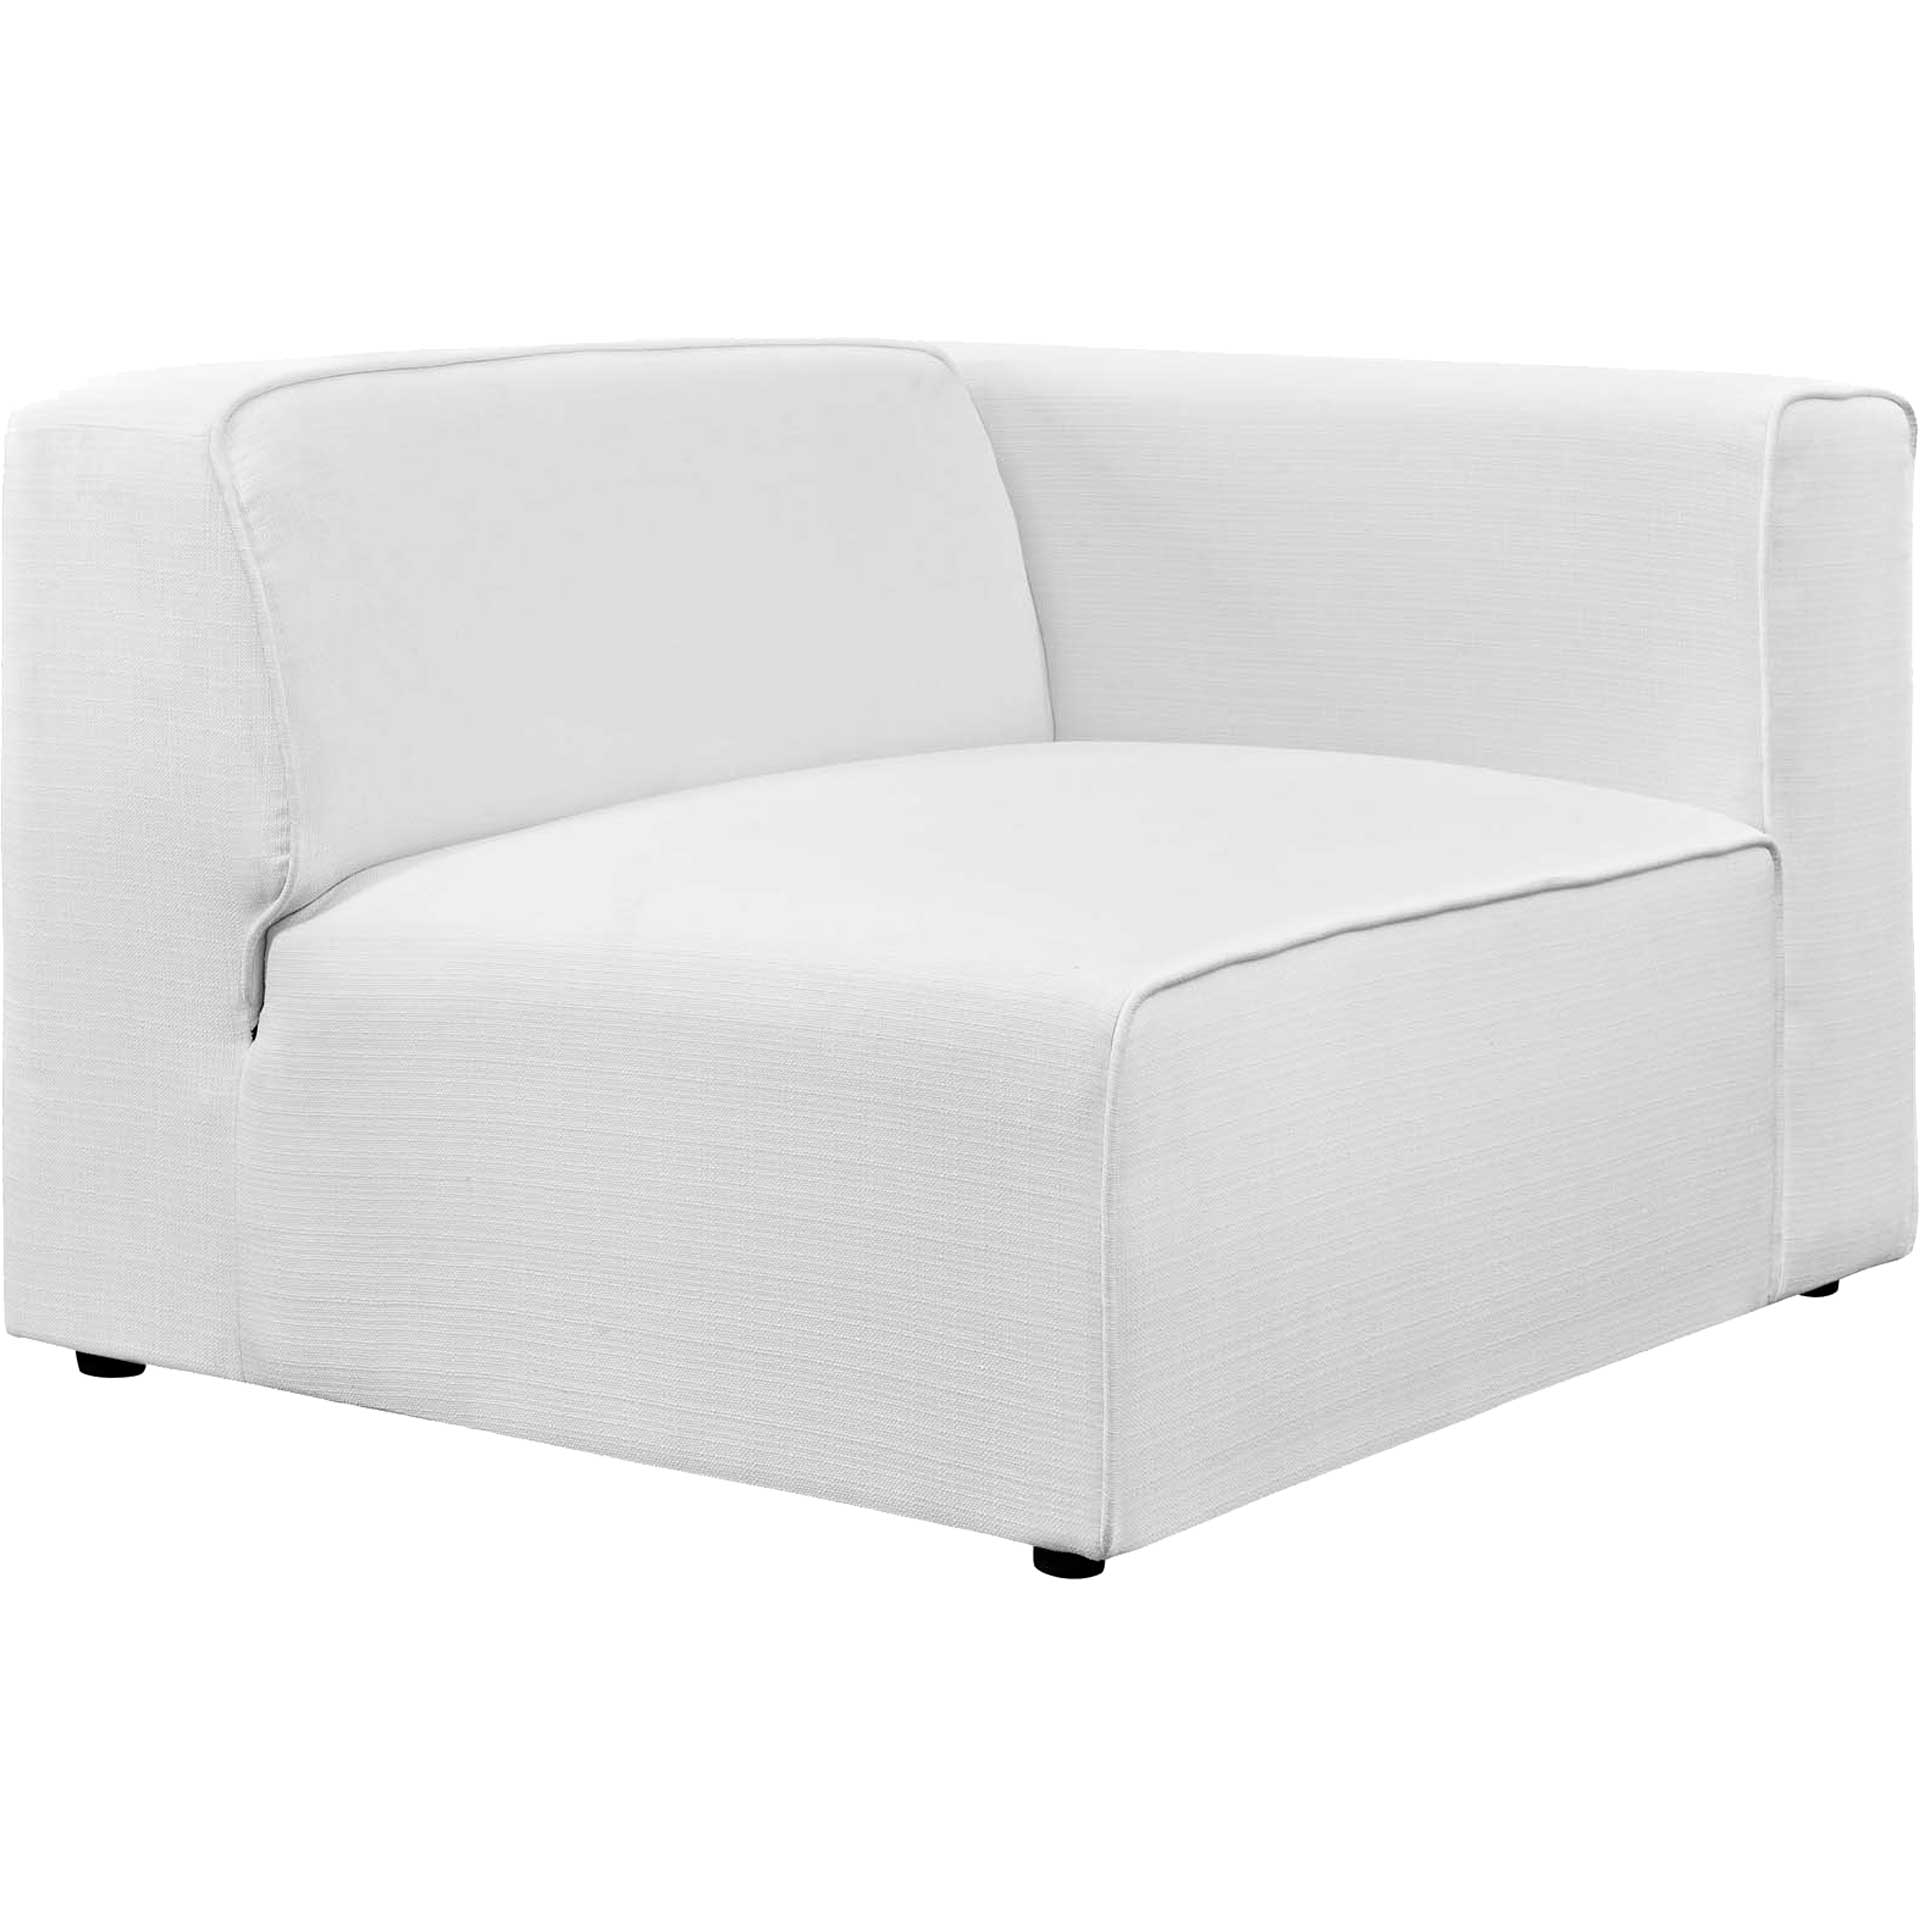 Maisie 7 Piece L-Shaped Sectional Sofa White